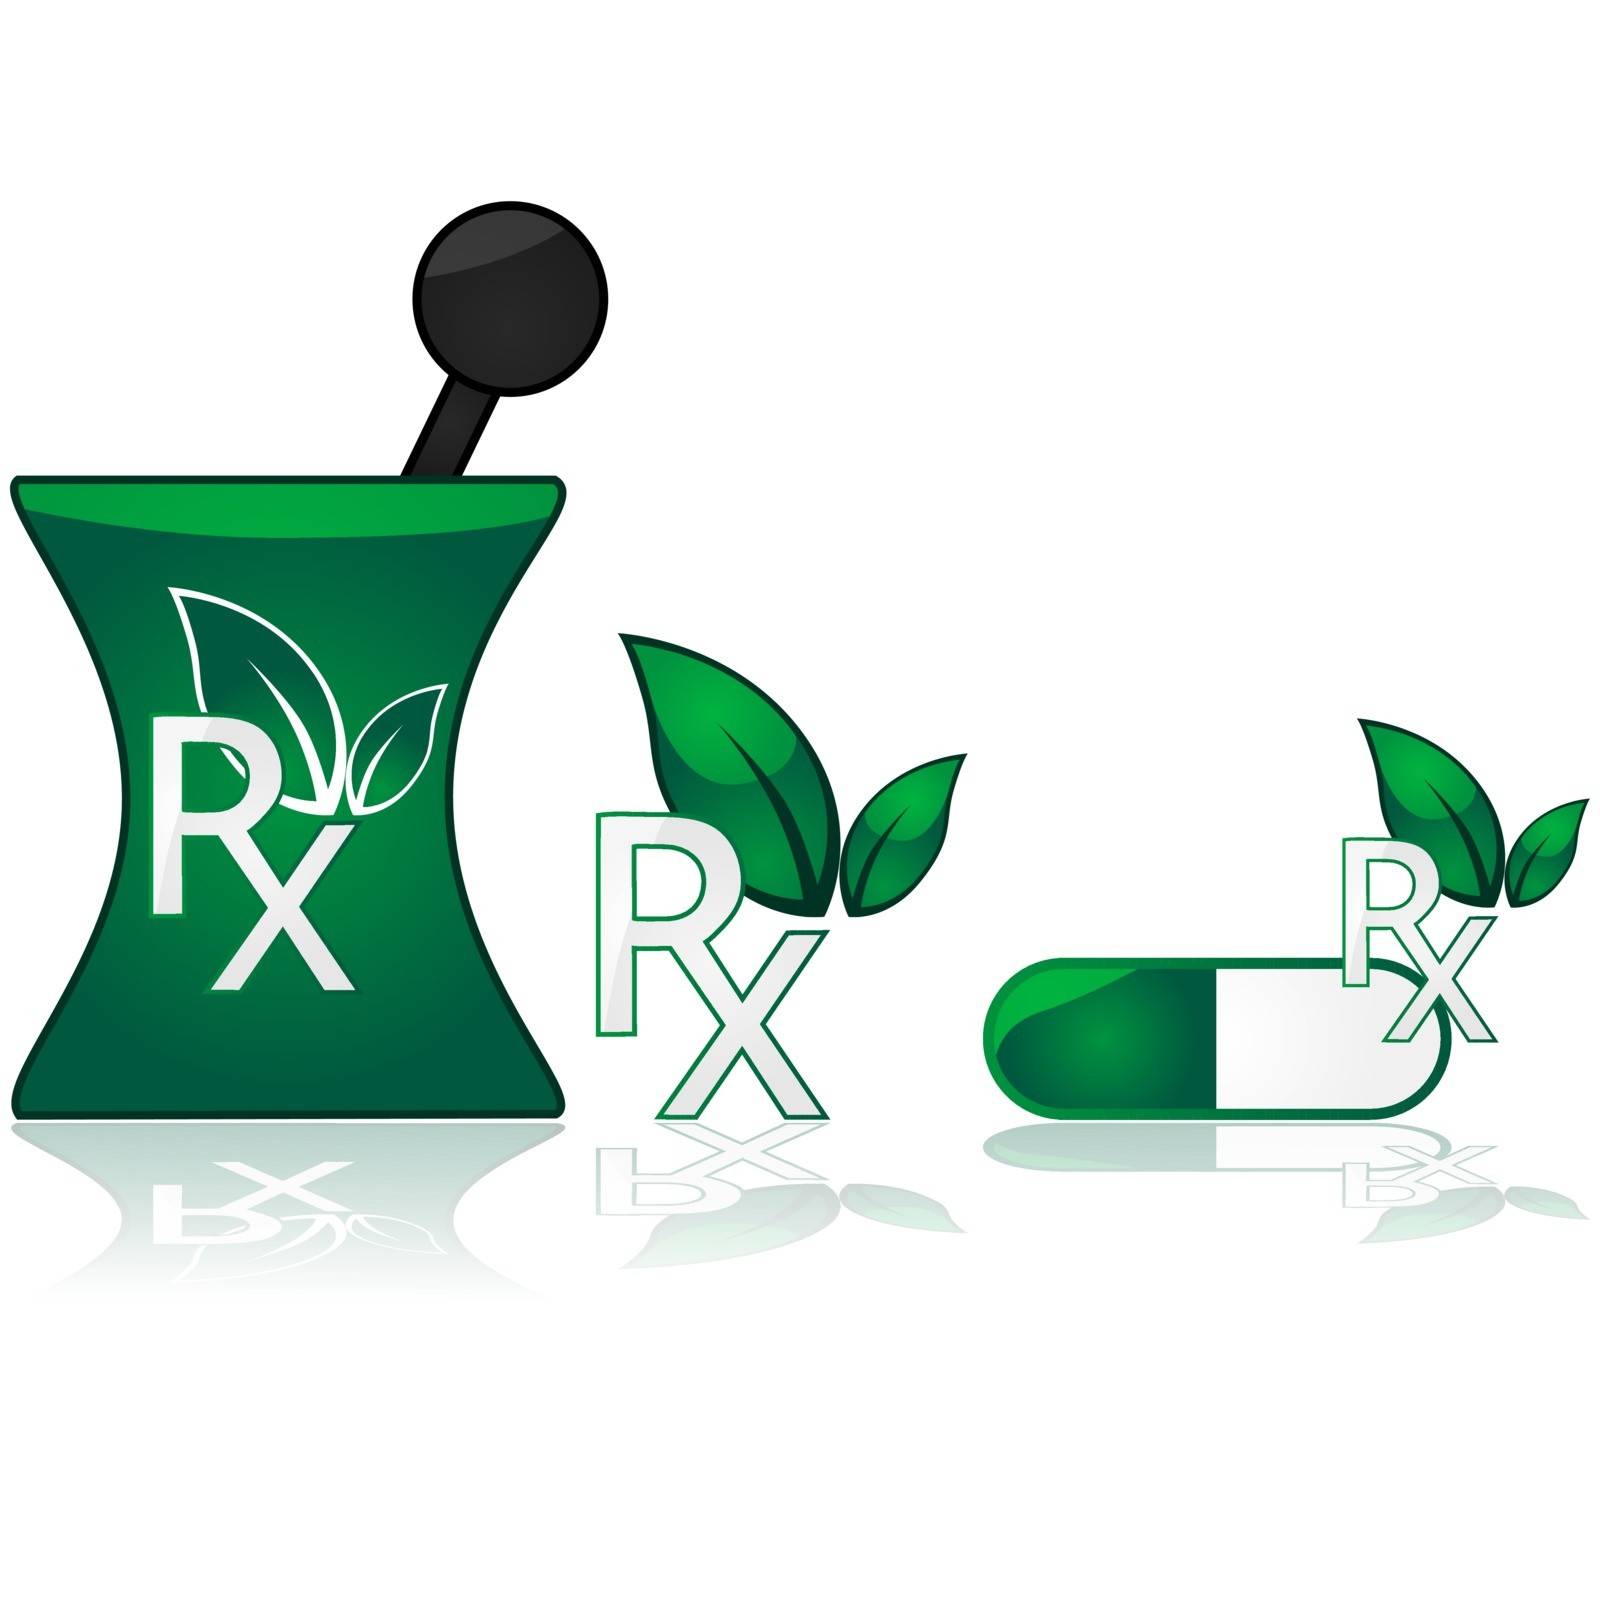 Concept illustration showing a prescription icon with a couple of leaves on top, to represent alternative medicine